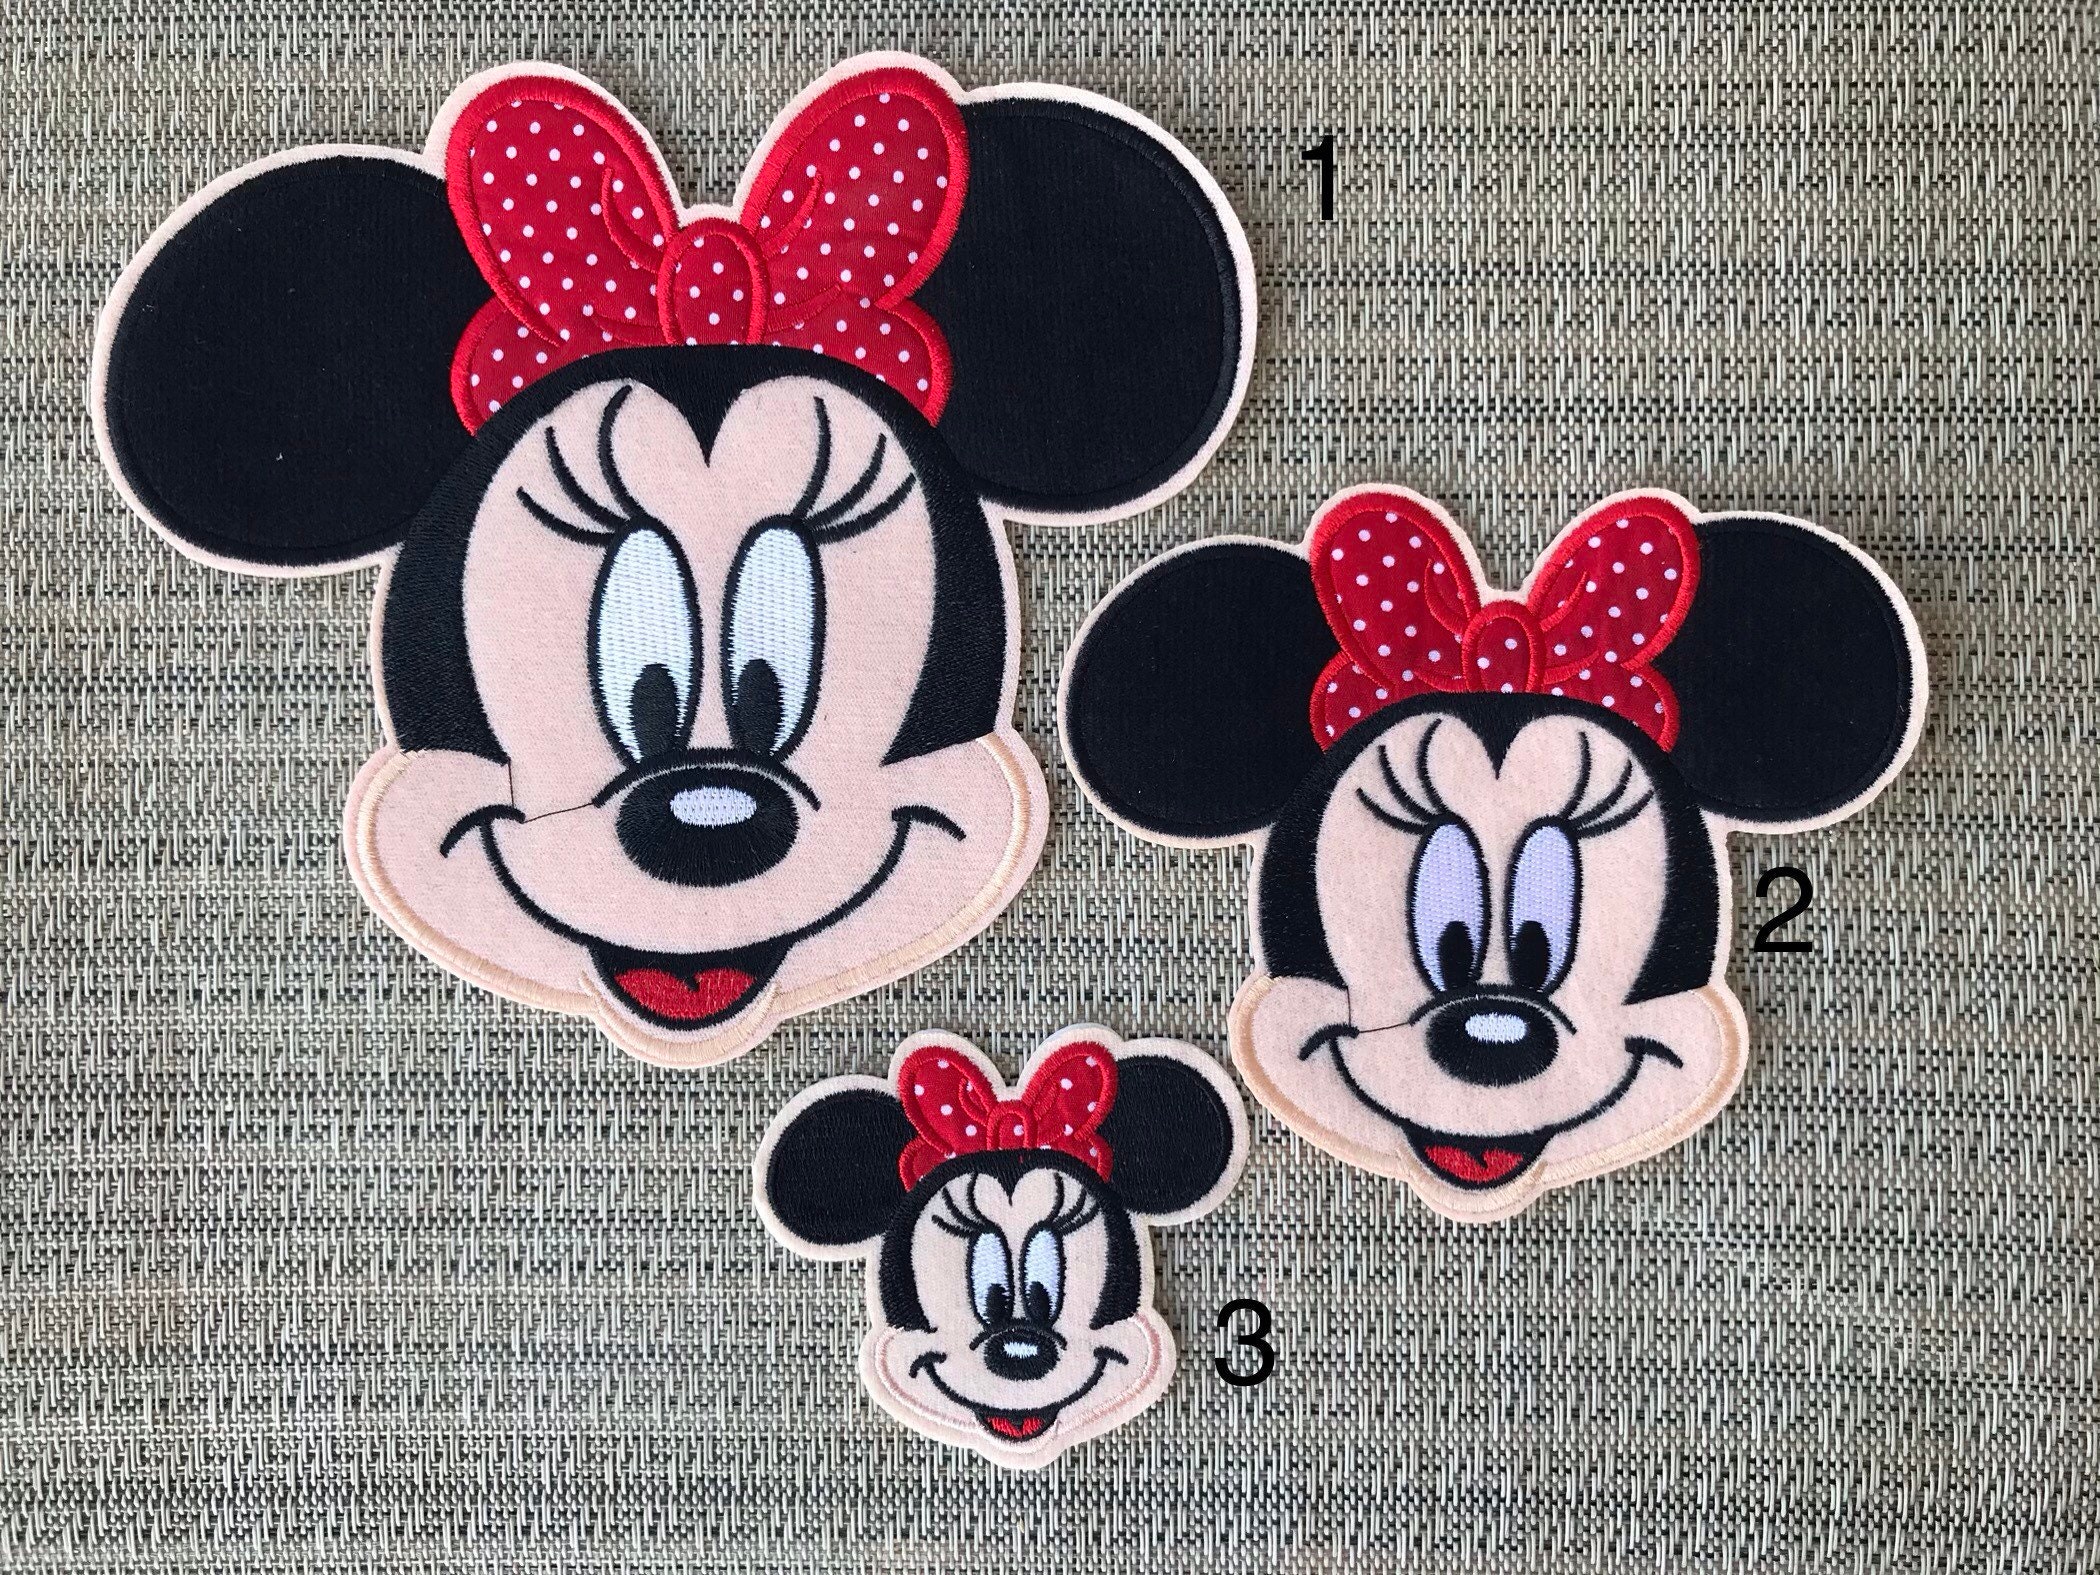 Minnie Mouse Inspired Iron on Patch, Large Minnie Mouse Inspired